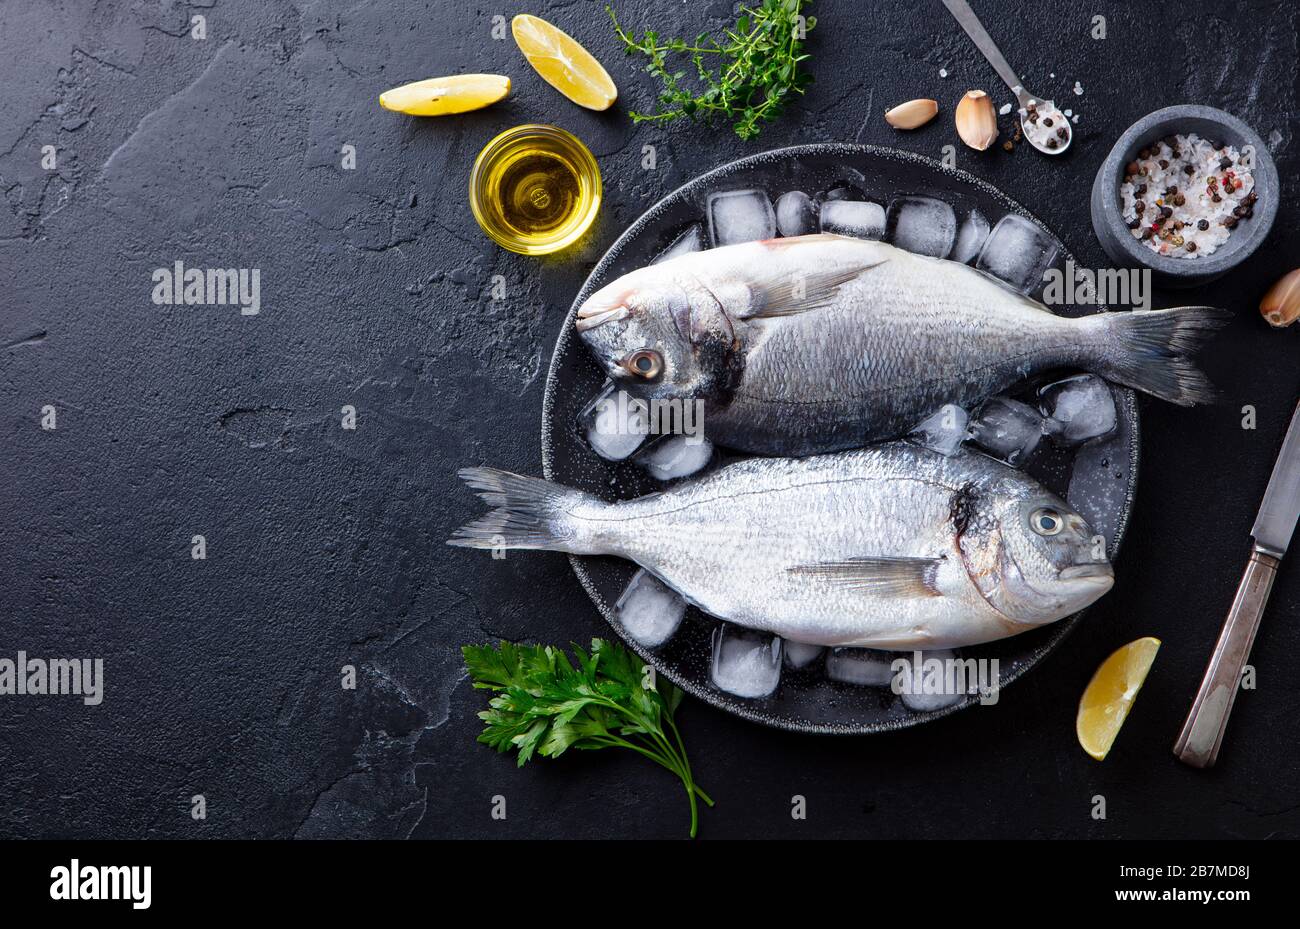 Dorado raw fish on a plate with ice and lemon. Black slate background. Copy space. Top view. Stock Photo